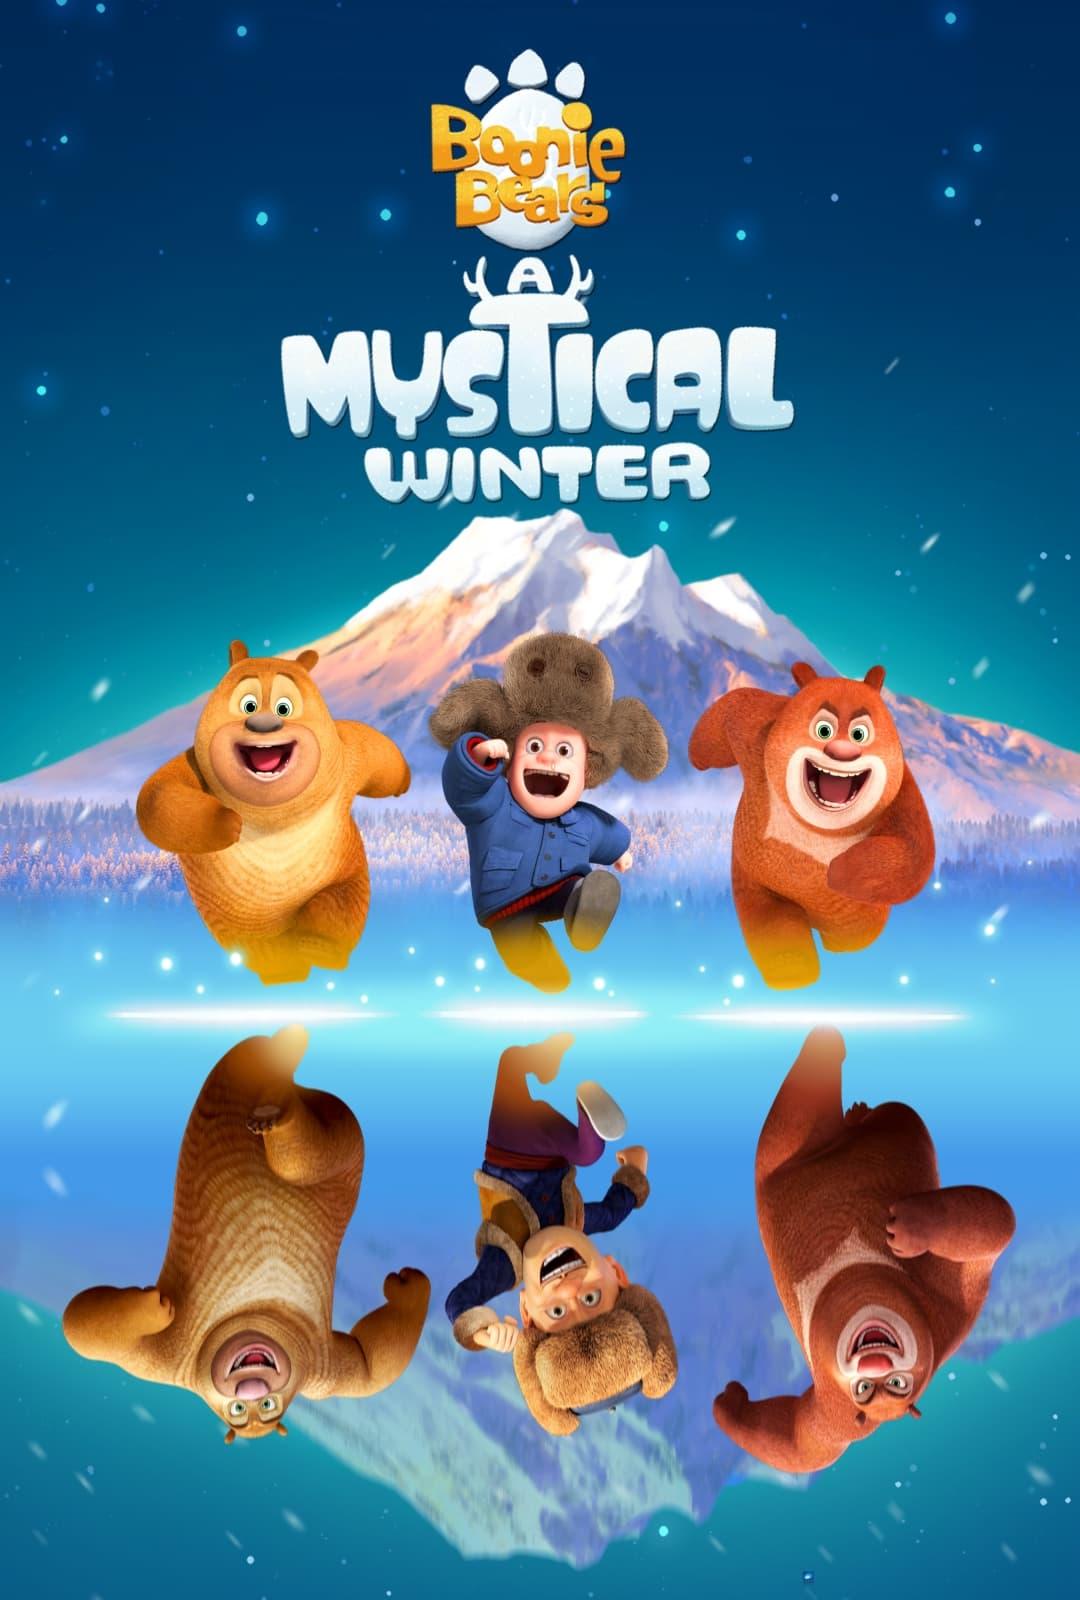 Boonie Bears: Mystical Winter poster